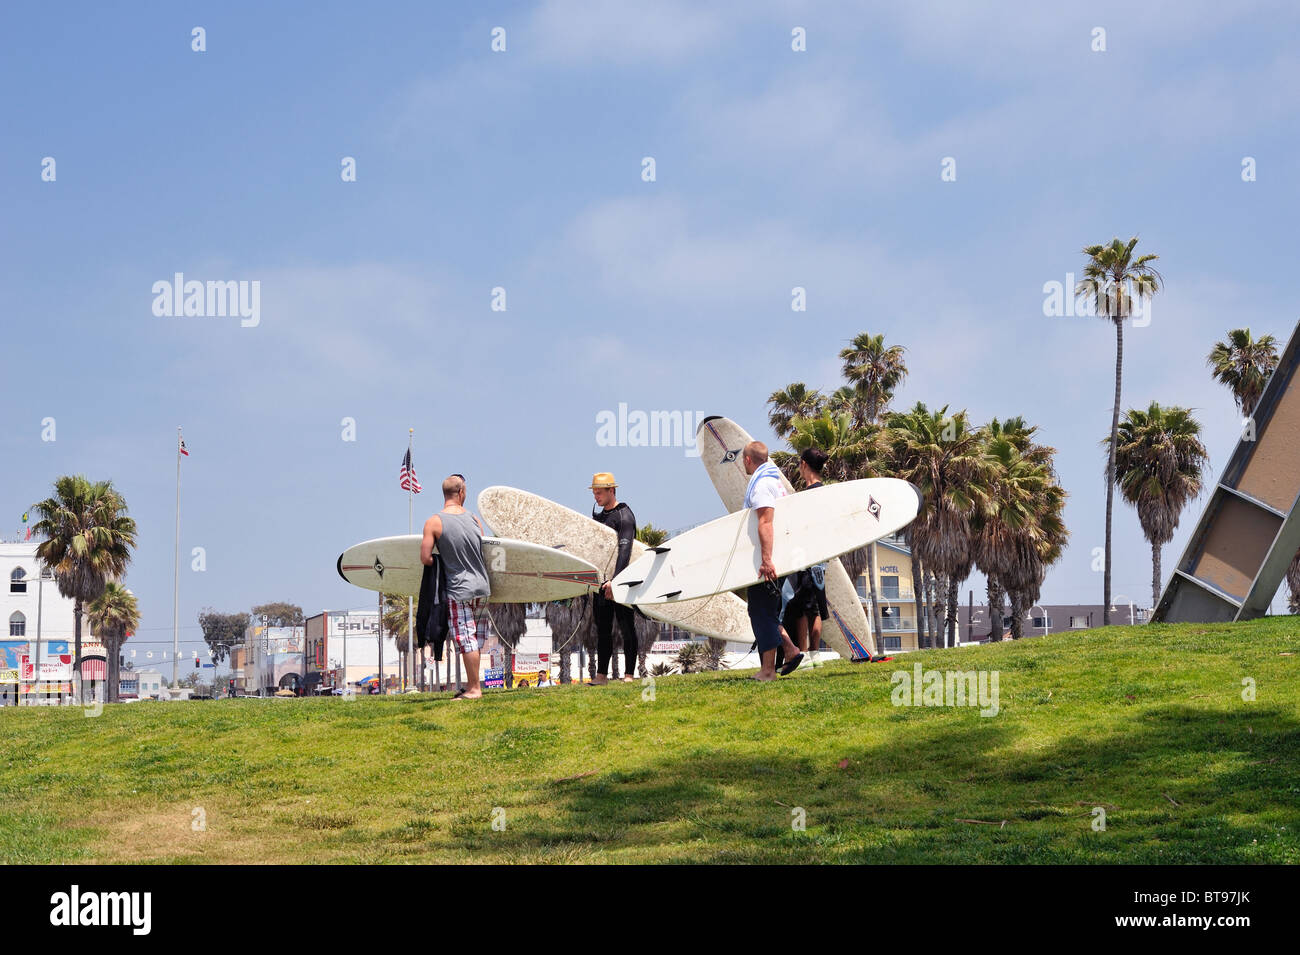 Group of surfers leaving the beach carrying surfboards, Venice Beach, Los Angeles, California USA. Looking away from camera Stock Photo